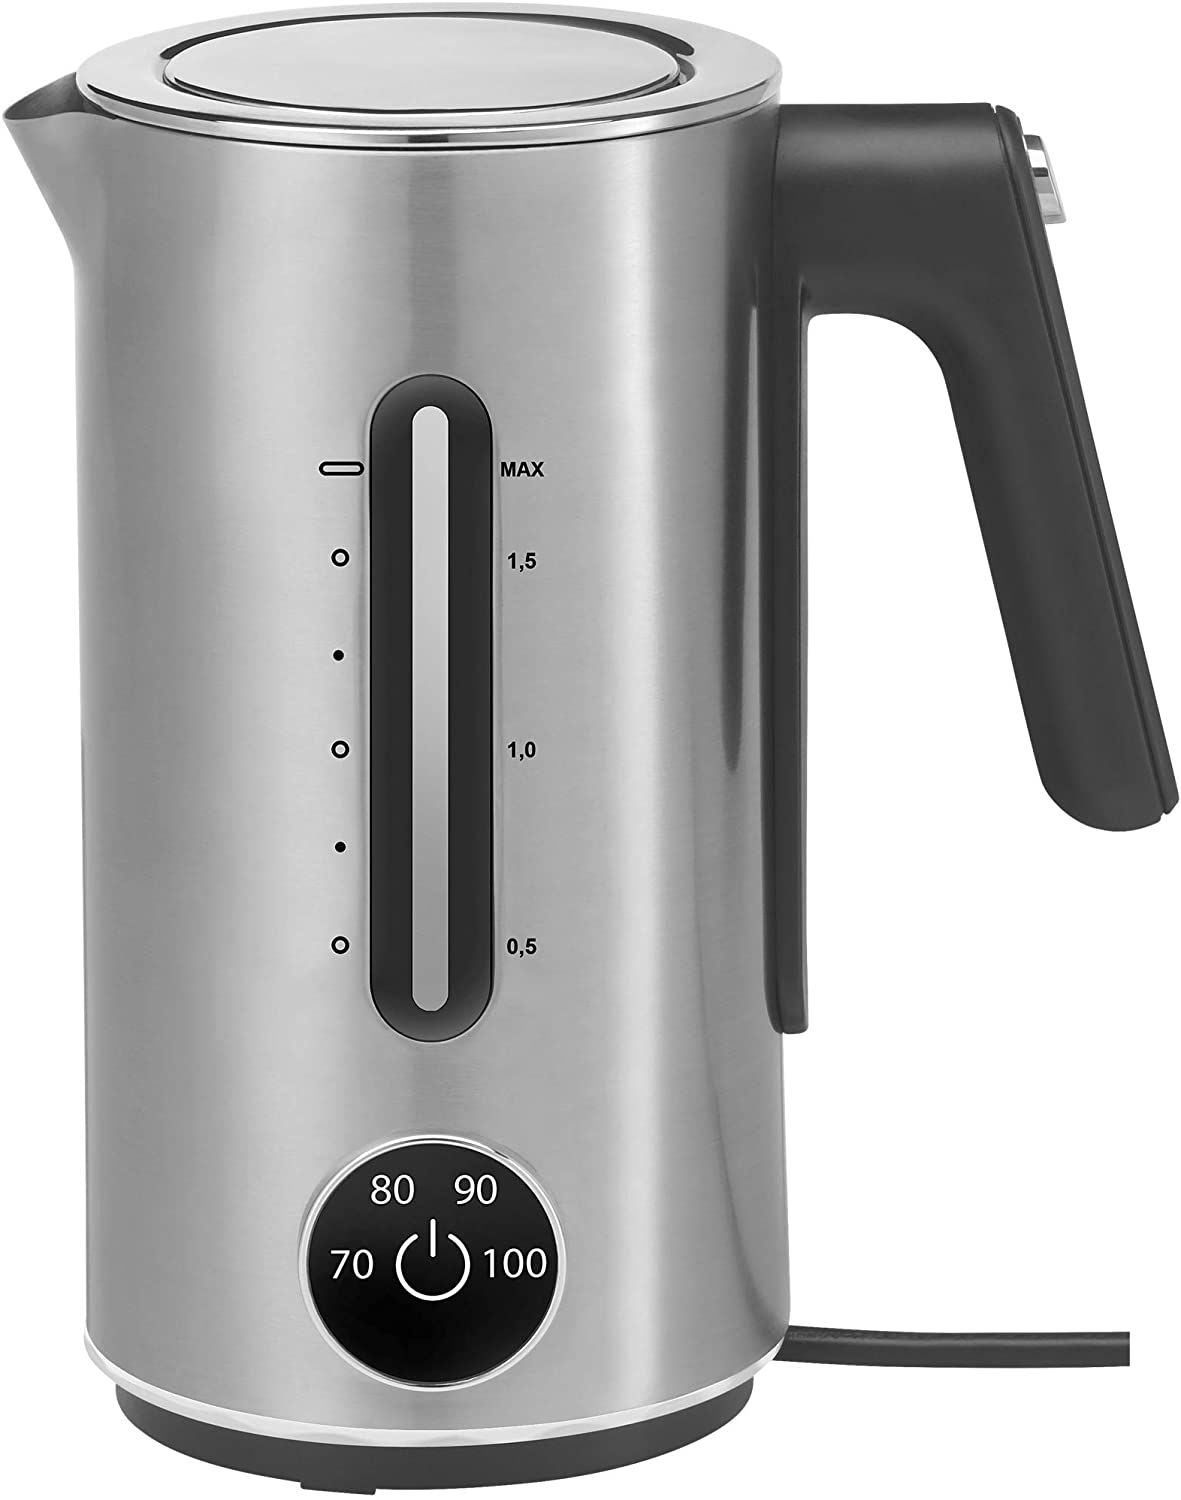 WMF Lumero Kettle with Temperature Setting 1.6 L, Electric Kettle Stainless Steel Limescale Filter, 3000 W, Illuminated Base, Matte Stainless Steel